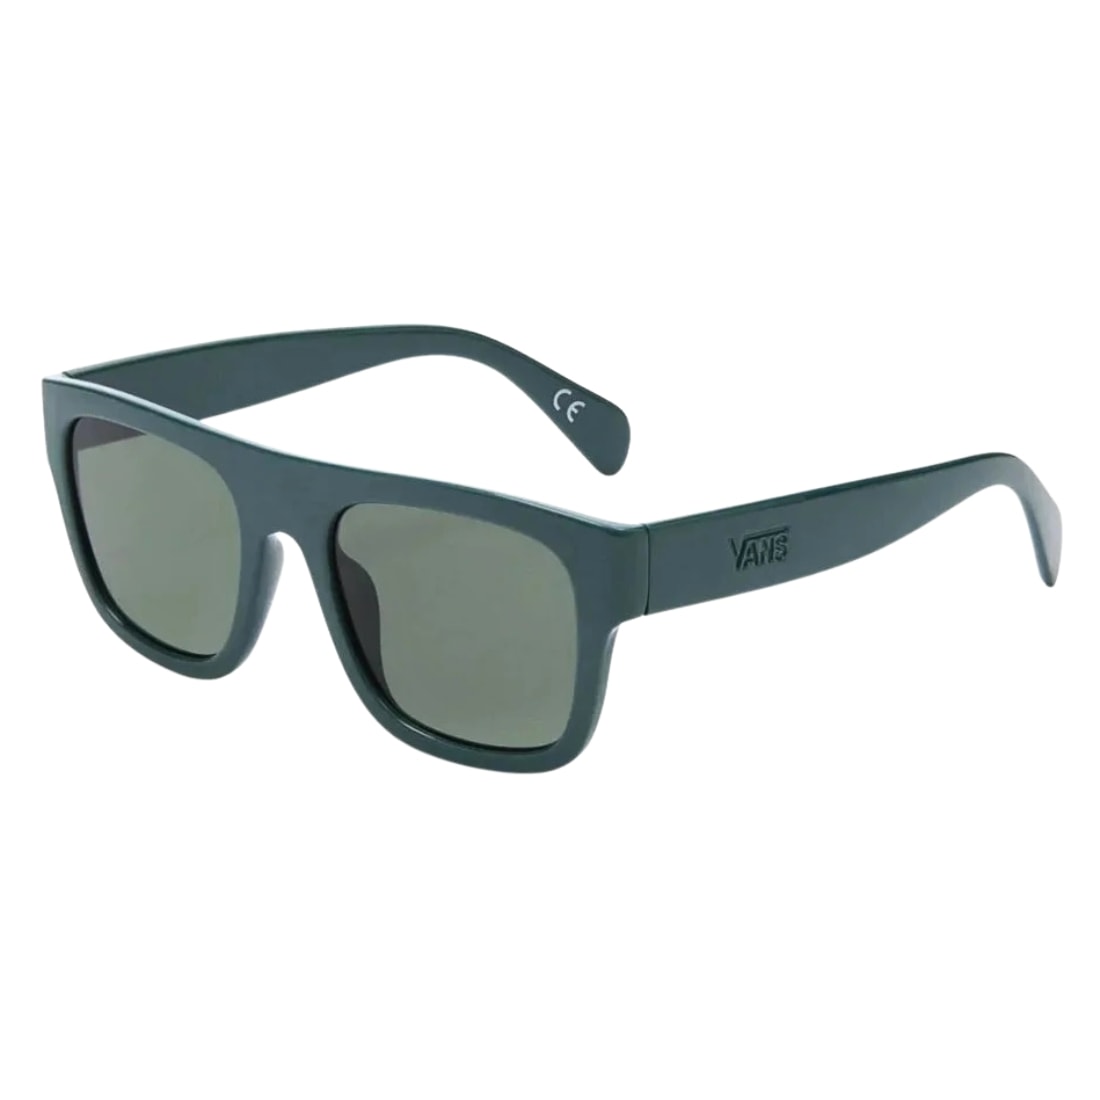 Vans Squared Off Shades Sunglasses - Bistro Green - Square/Rectangular Sunglasses by Vans